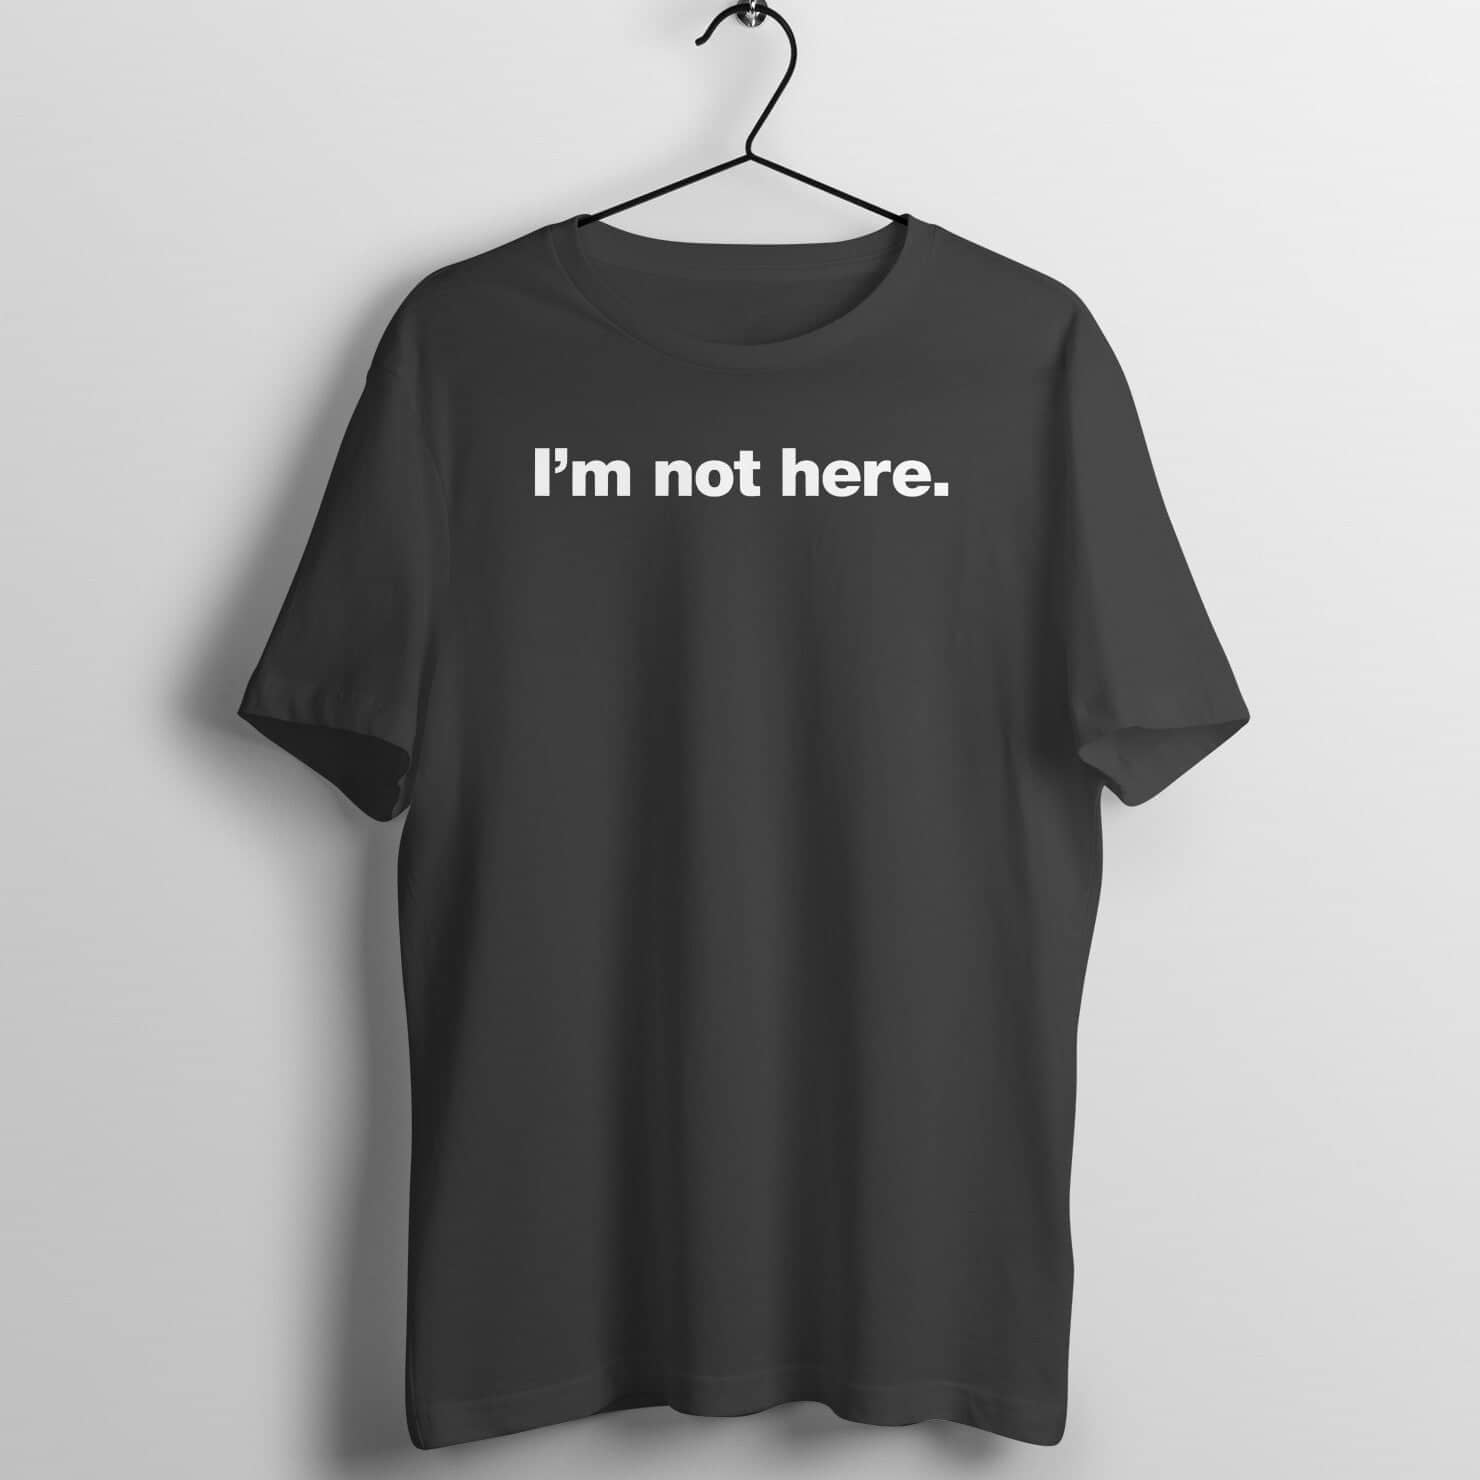 I'm Not Here Funny Black T Shirt for Men and Women freeshipping - Catch My Drift India